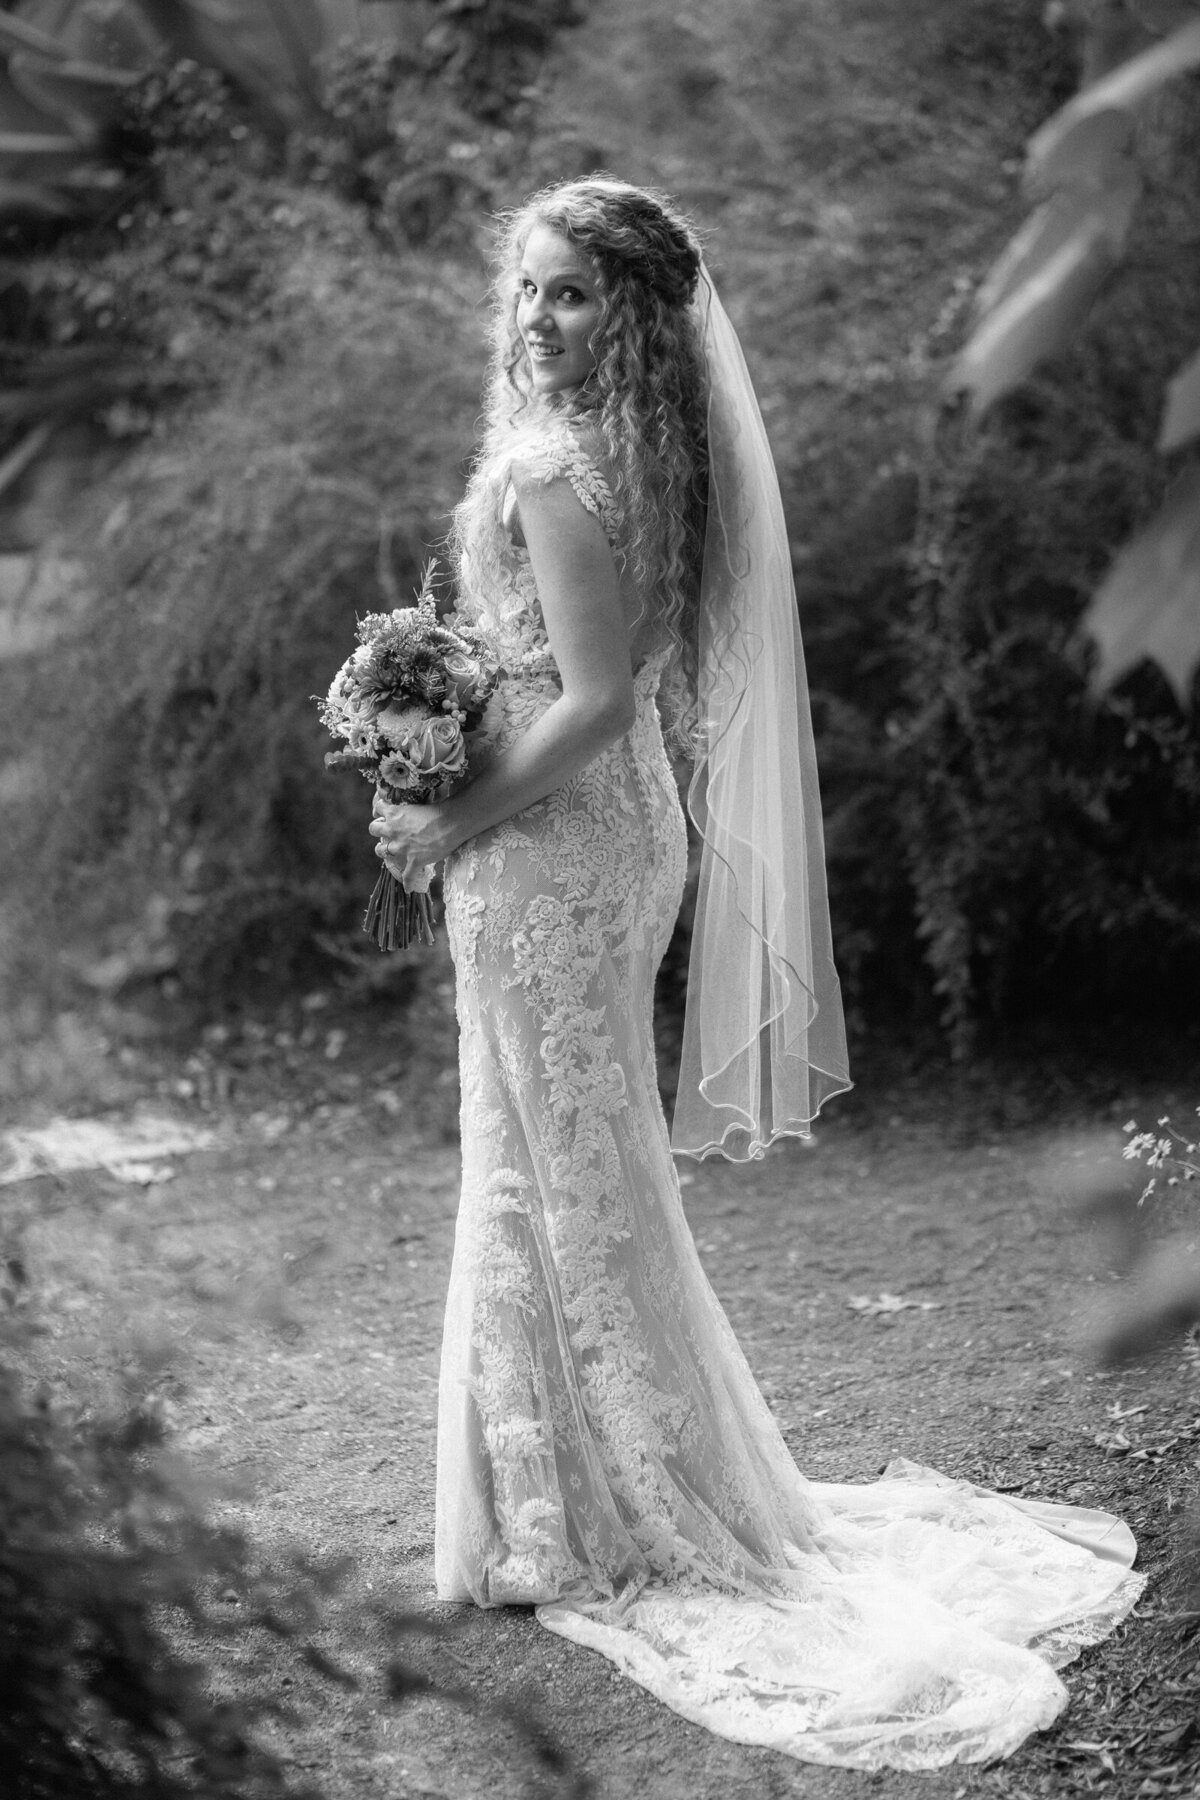 A bride holding a bouquet of flowers looking over one shoulder